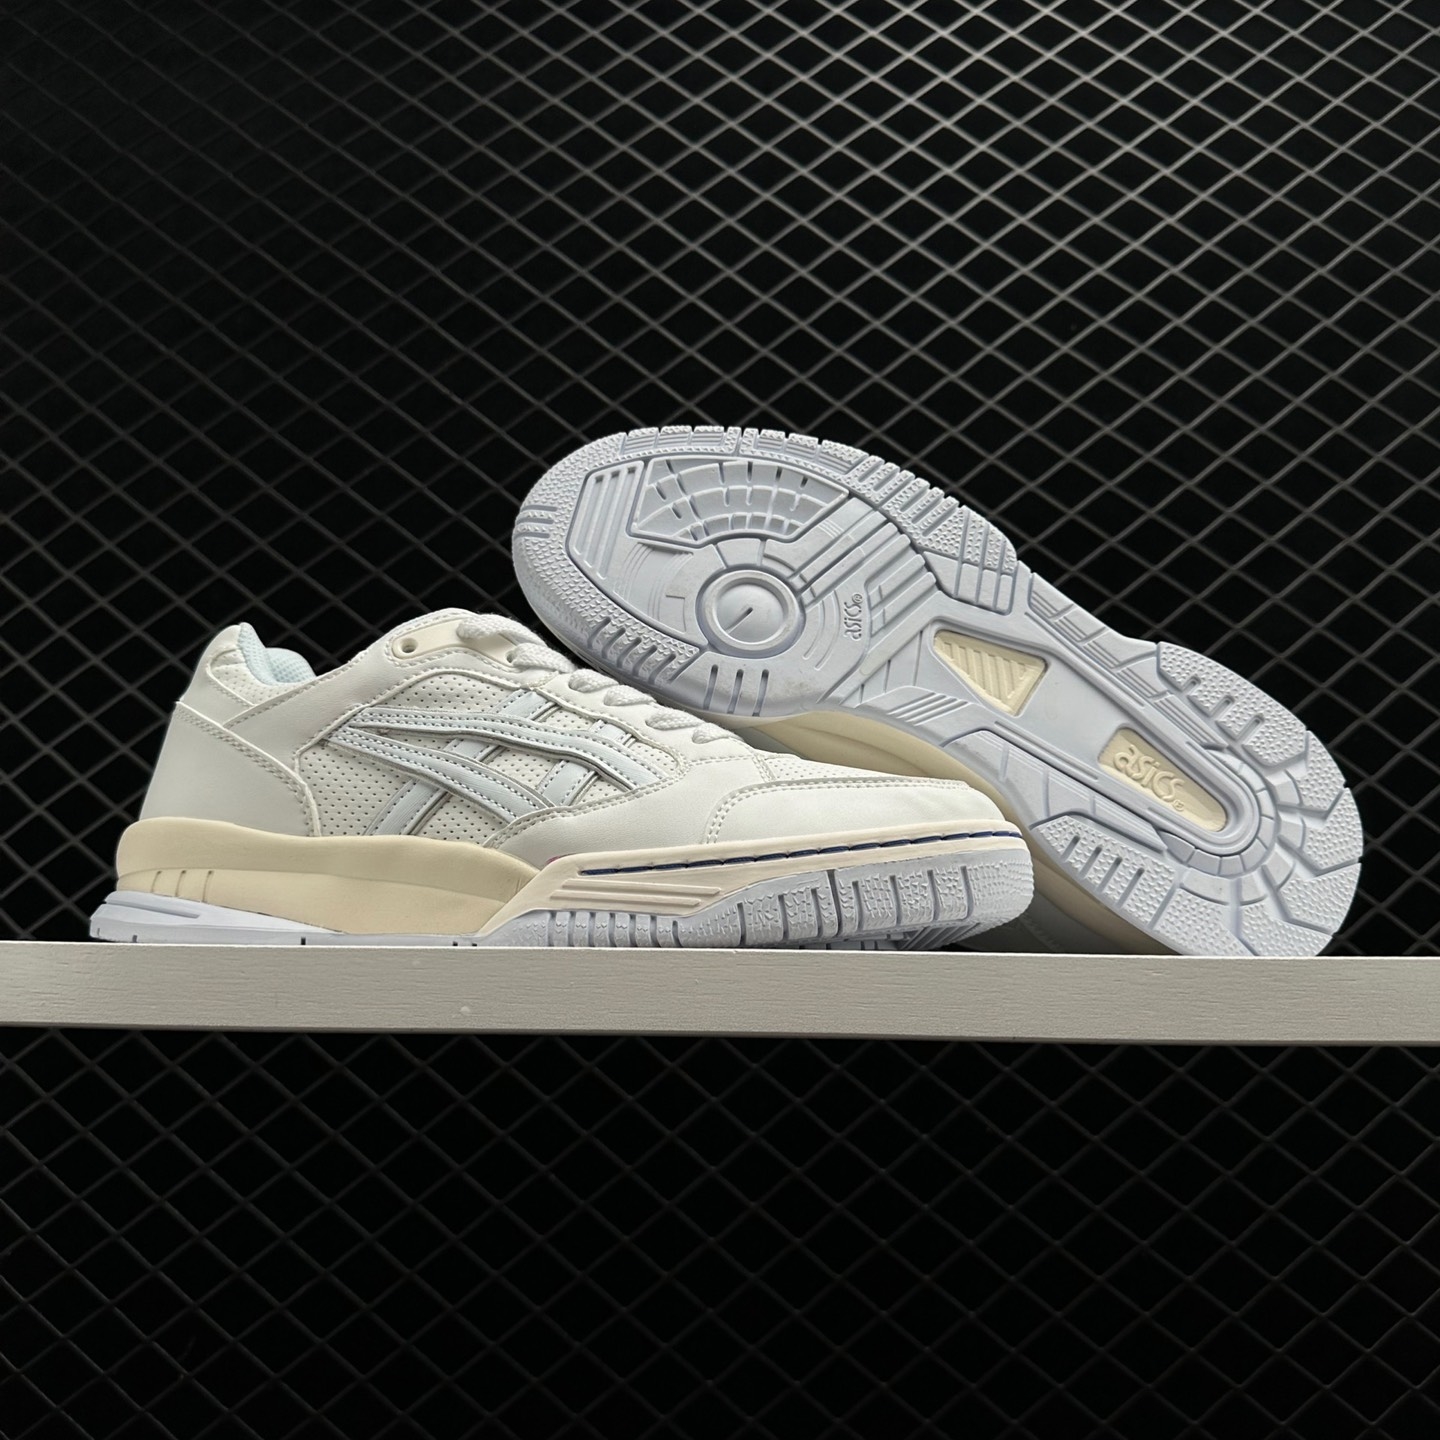 Asics Gel-Spotlyte Low White: Sleek and Stylish Athletic Sneakers